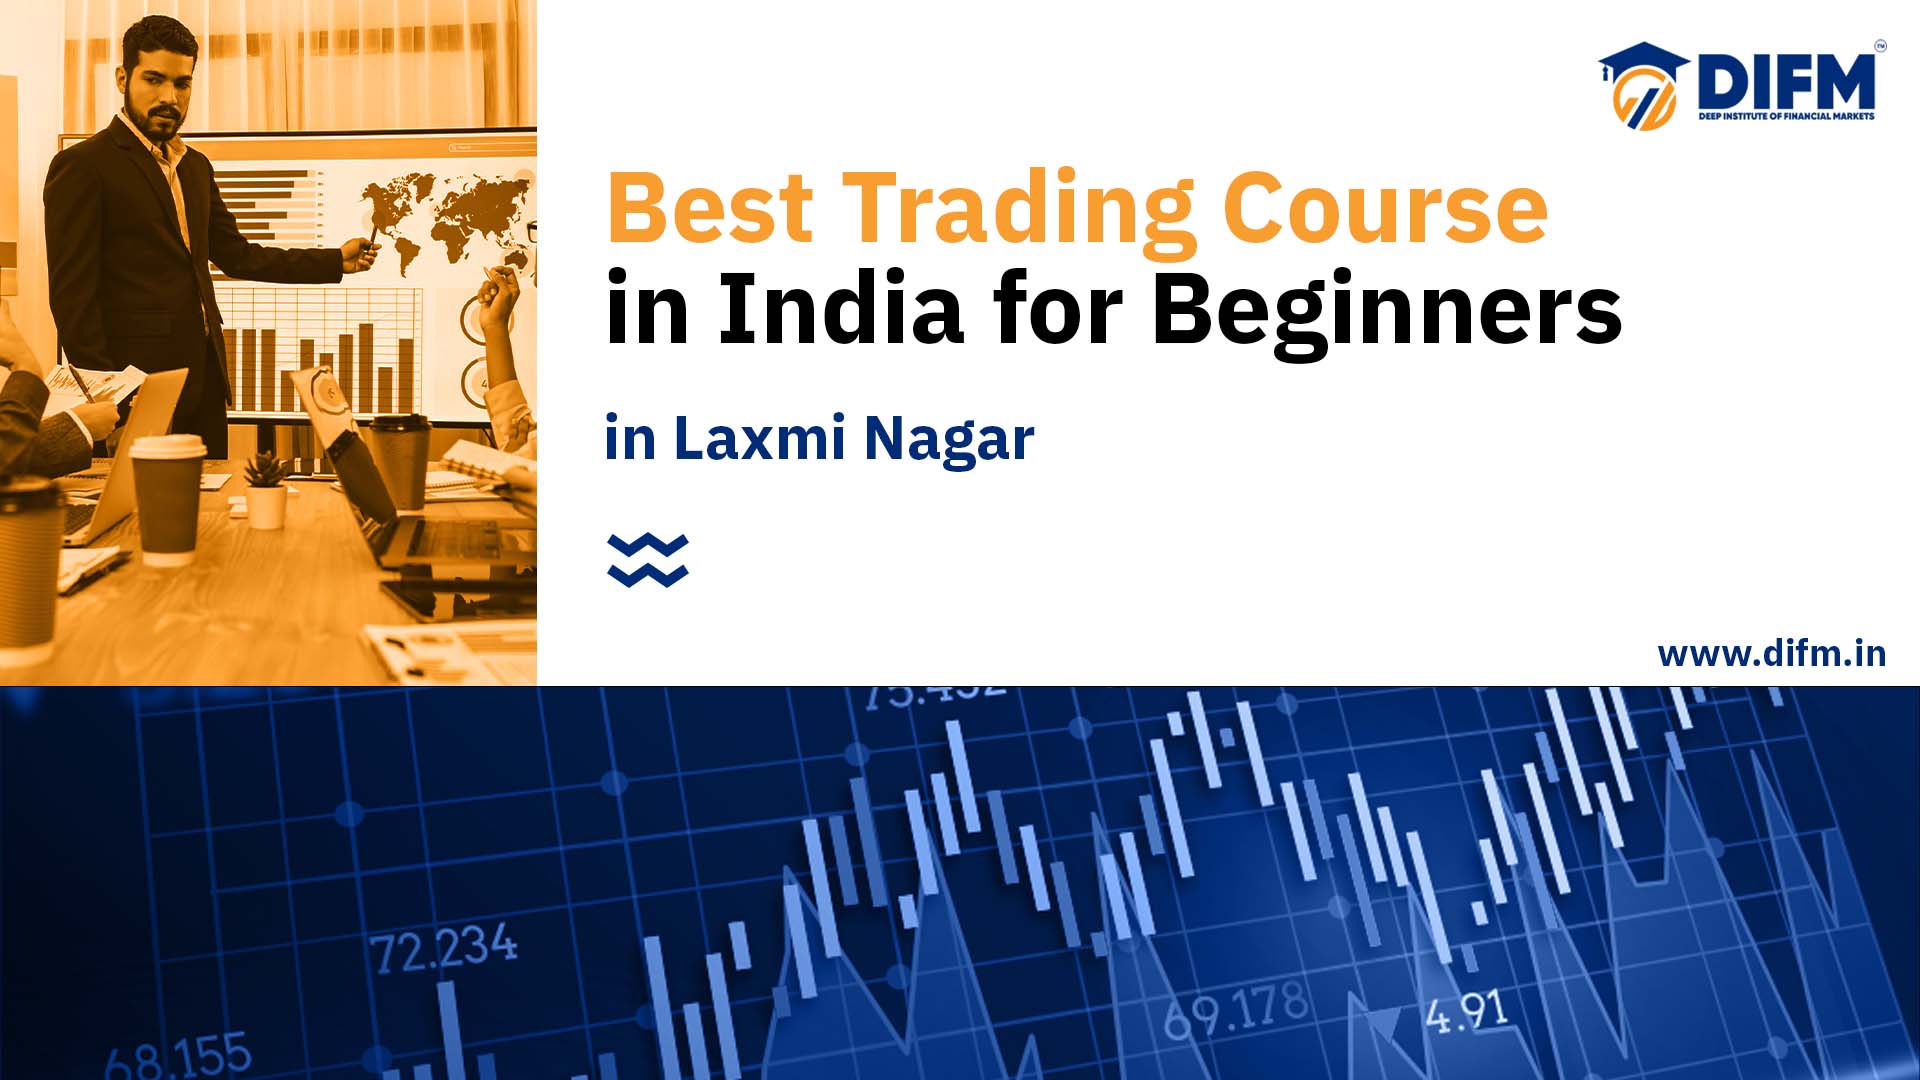 Best Trading Course in India - DIFM